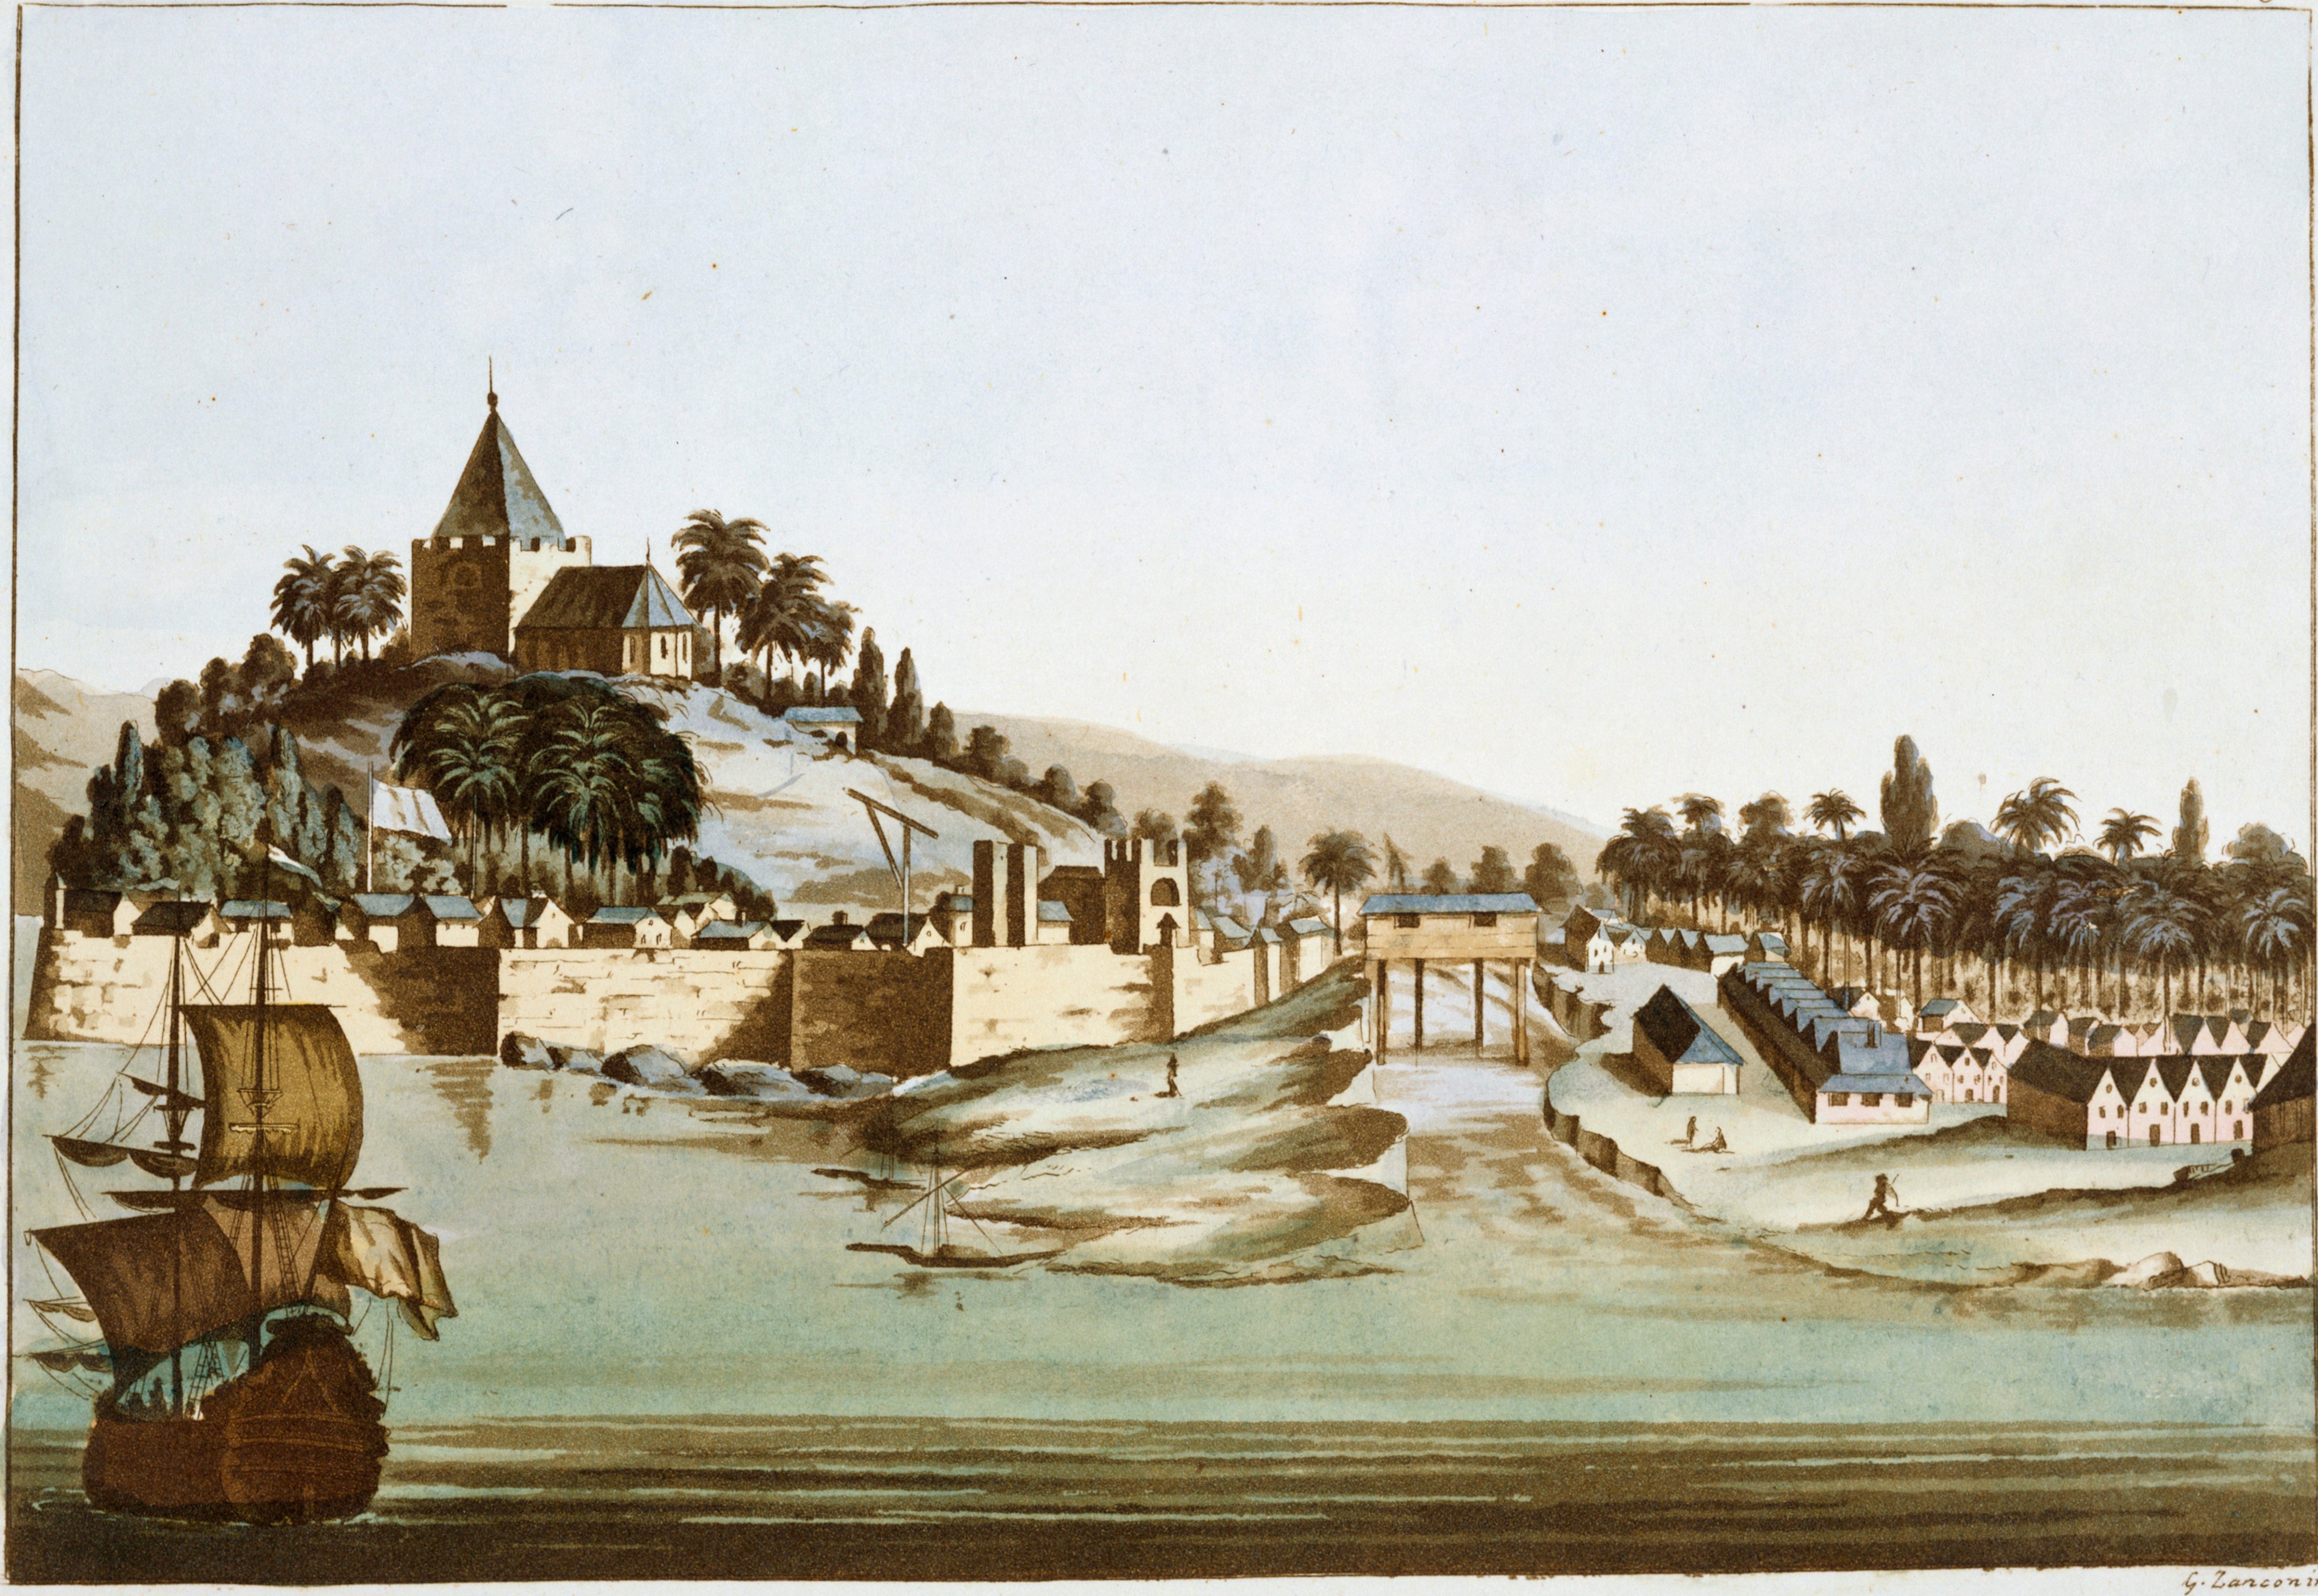 A drawing of ancient Malacca from a Travel Book by Giulio Ferrario. Once a powerful sultanate that cultivated ties with Ming dynasty China, it fell to Portuguese invaders in 1511. Photo: Getty Images